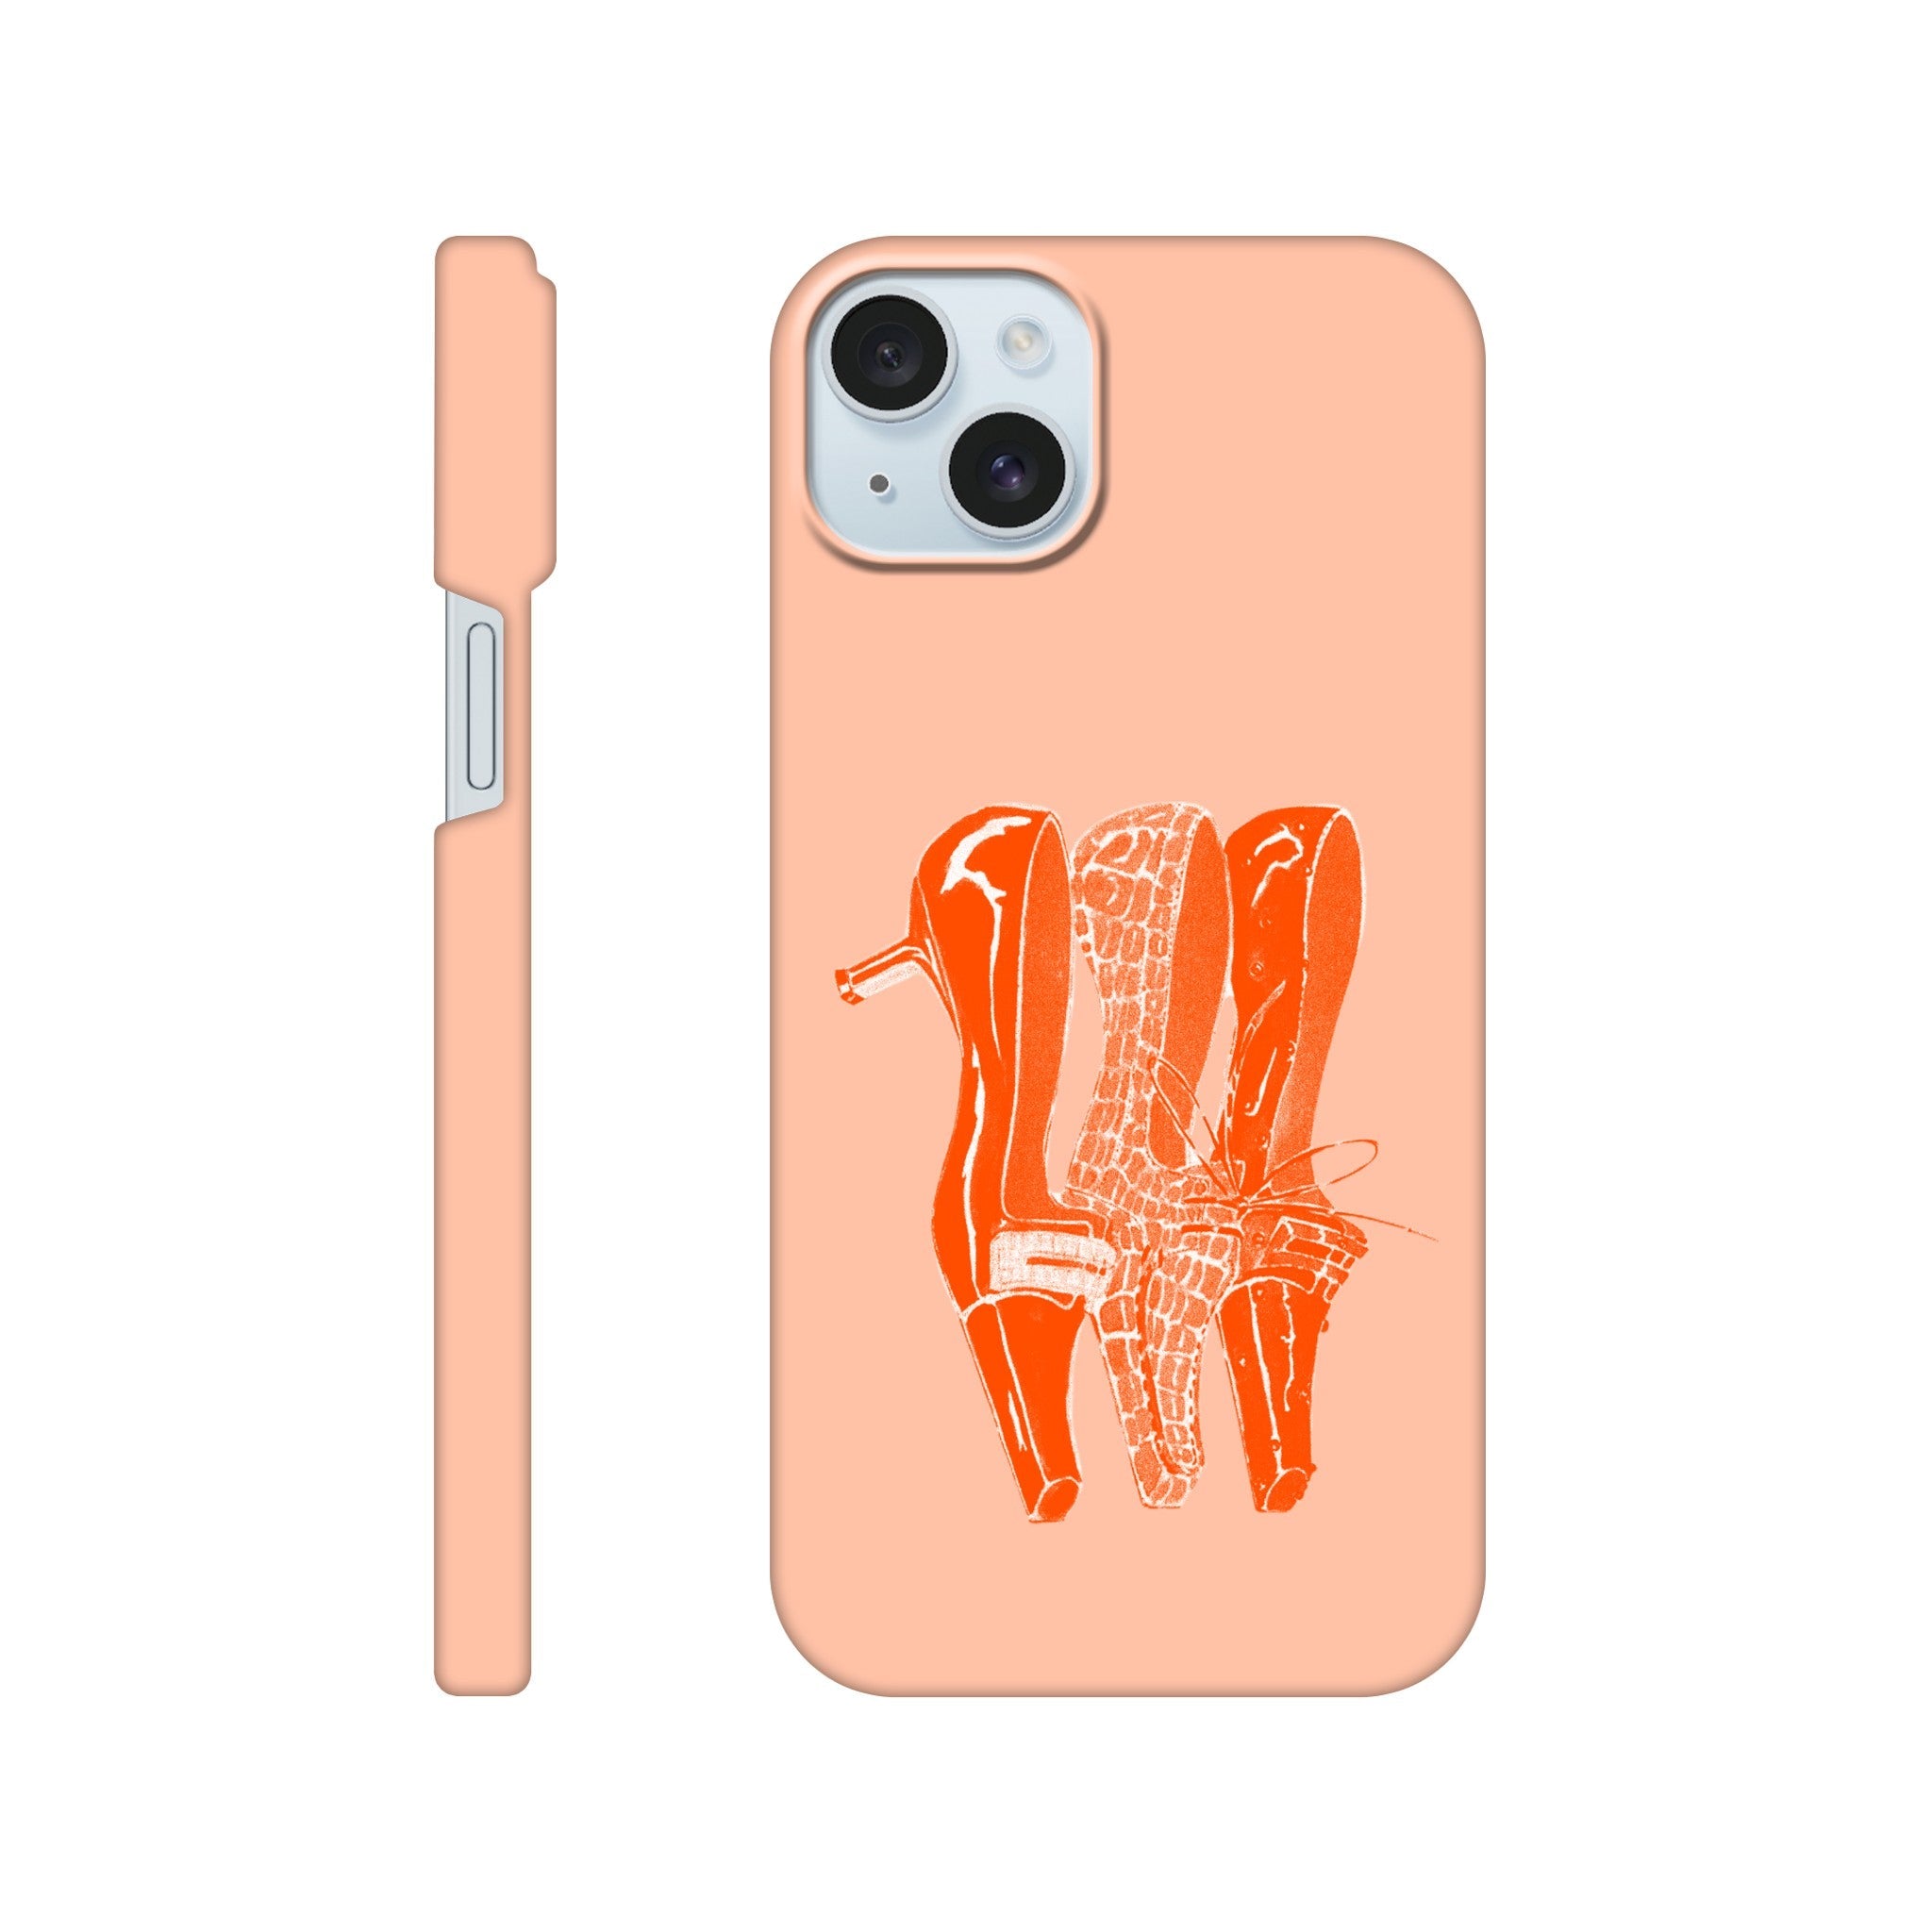 'Manolo' phone case - In Print We Trust